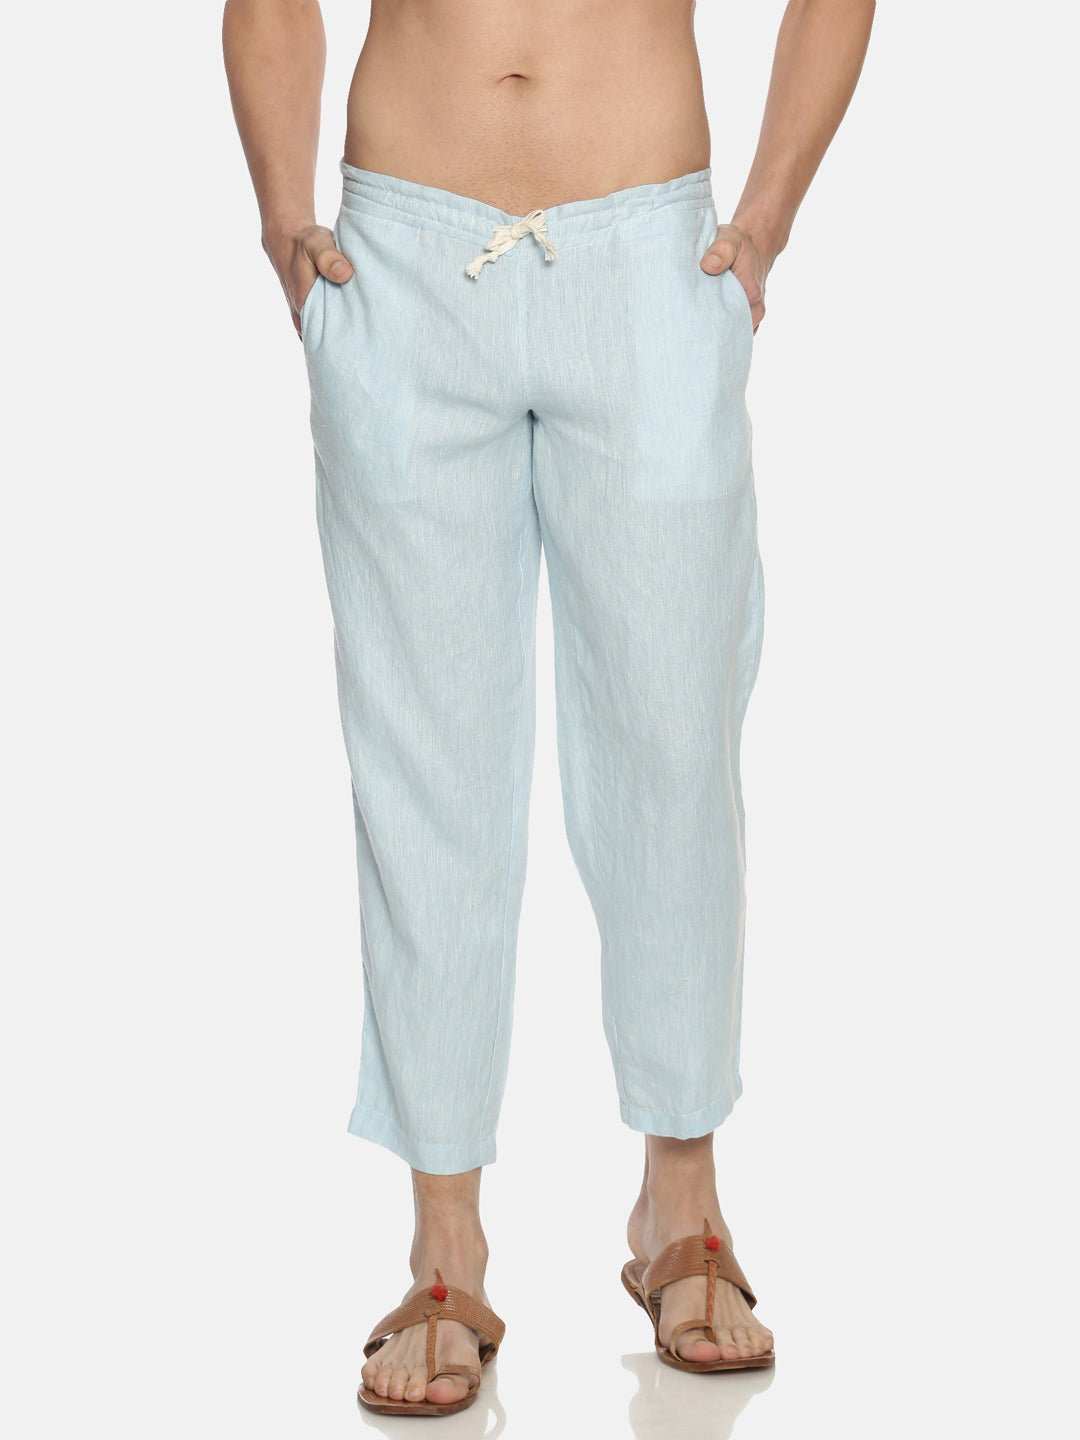 White Colour Solid Lounge Pants For Women